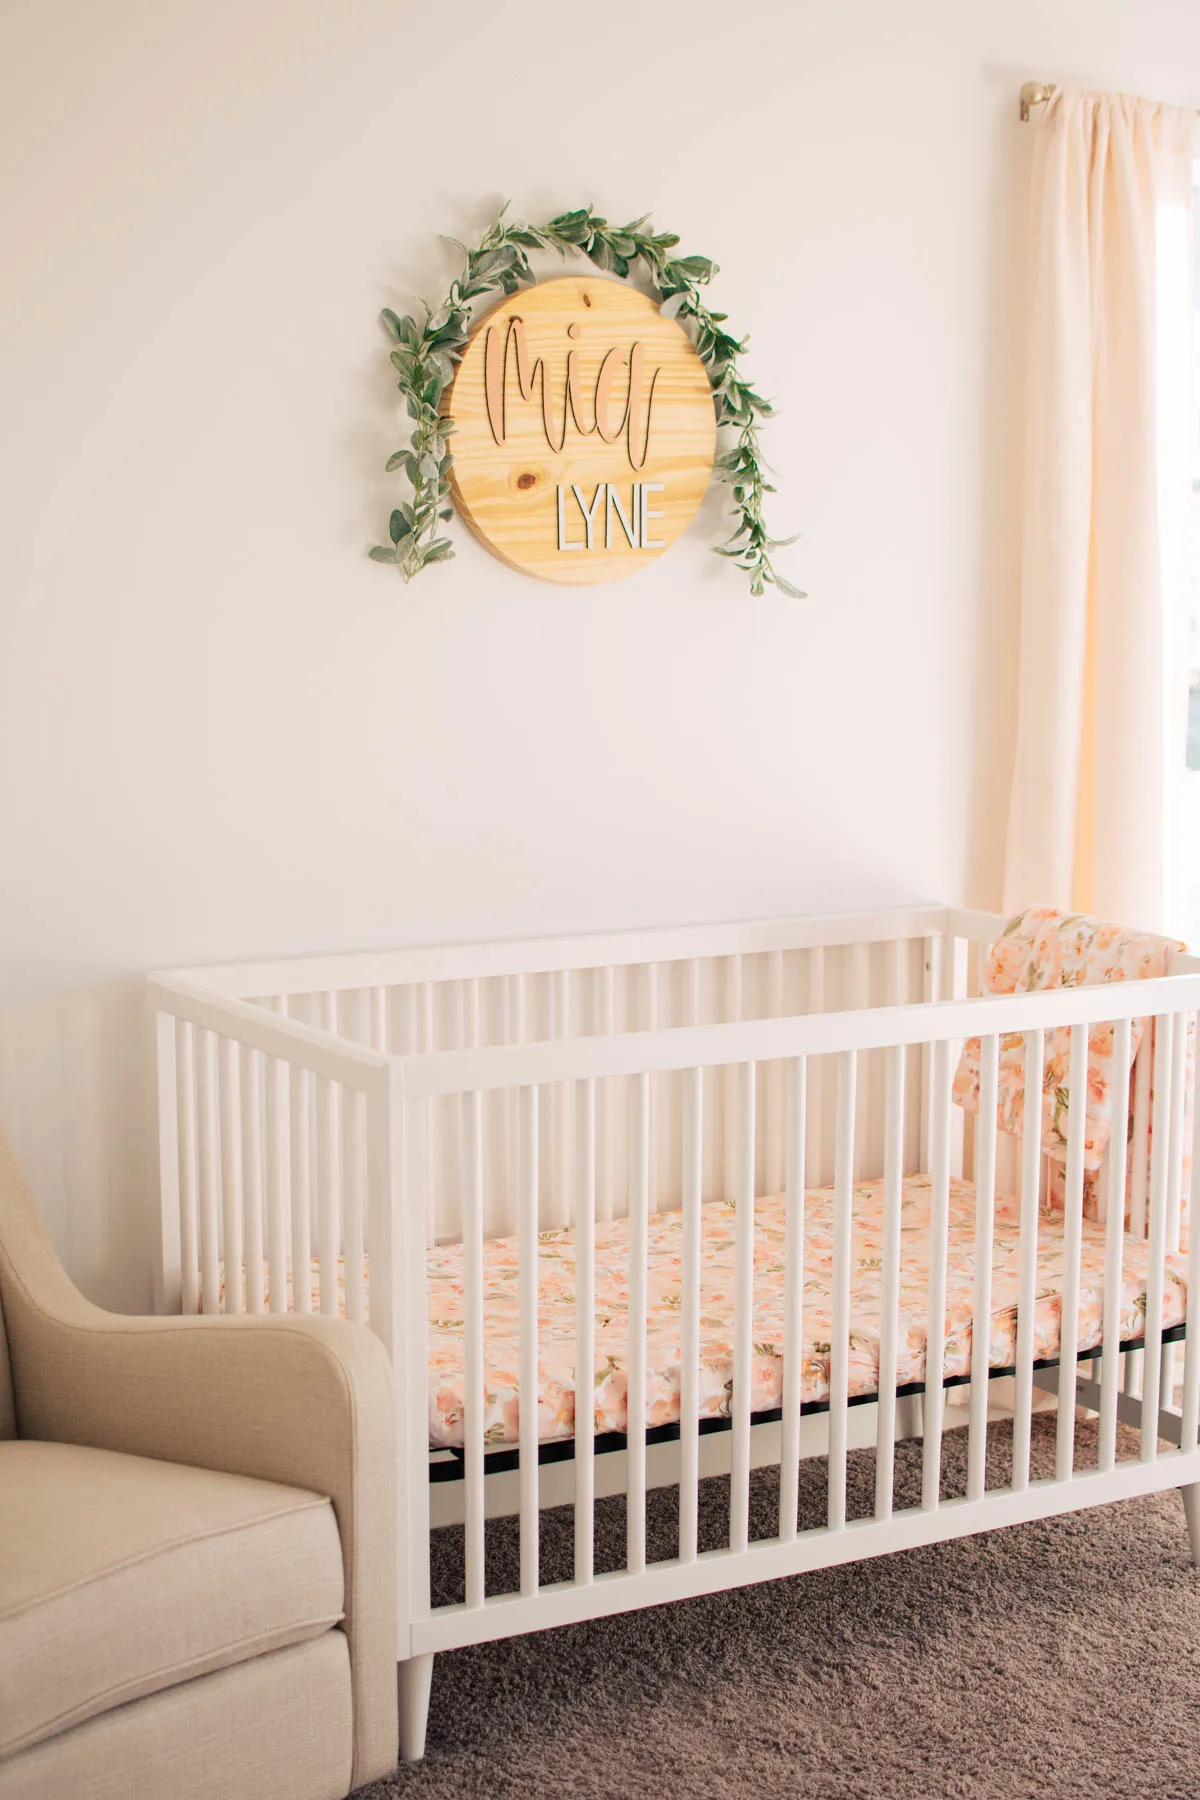 White crib with floral crib sheets next to glider rocking chair in nursery.